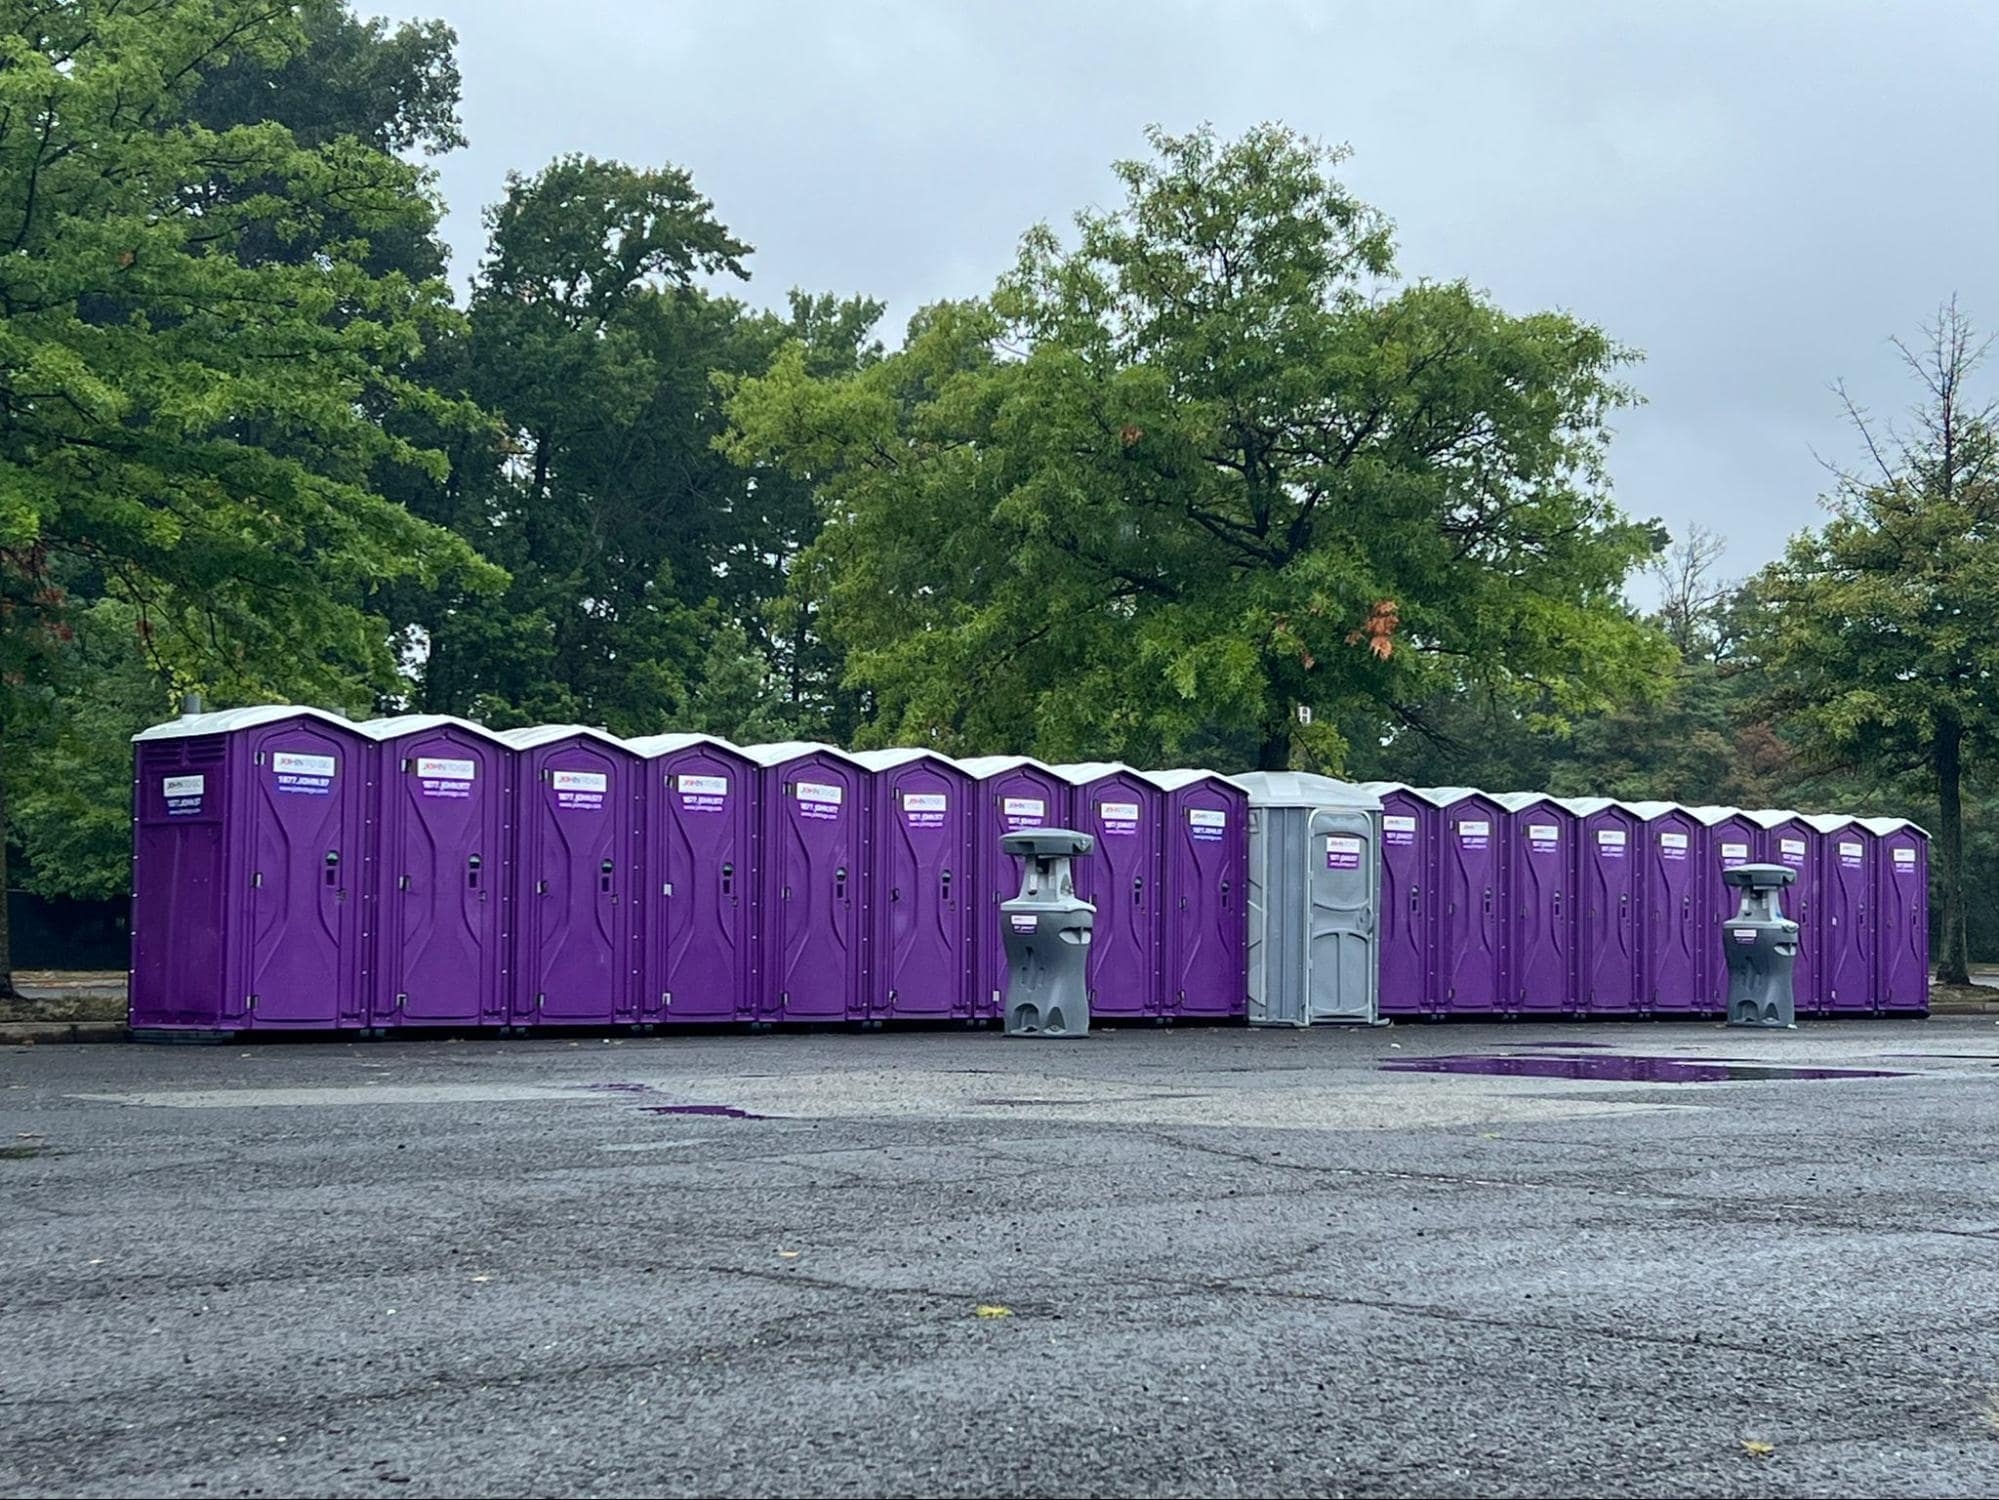 Porta potty rentals in Nassau County for outdoor events